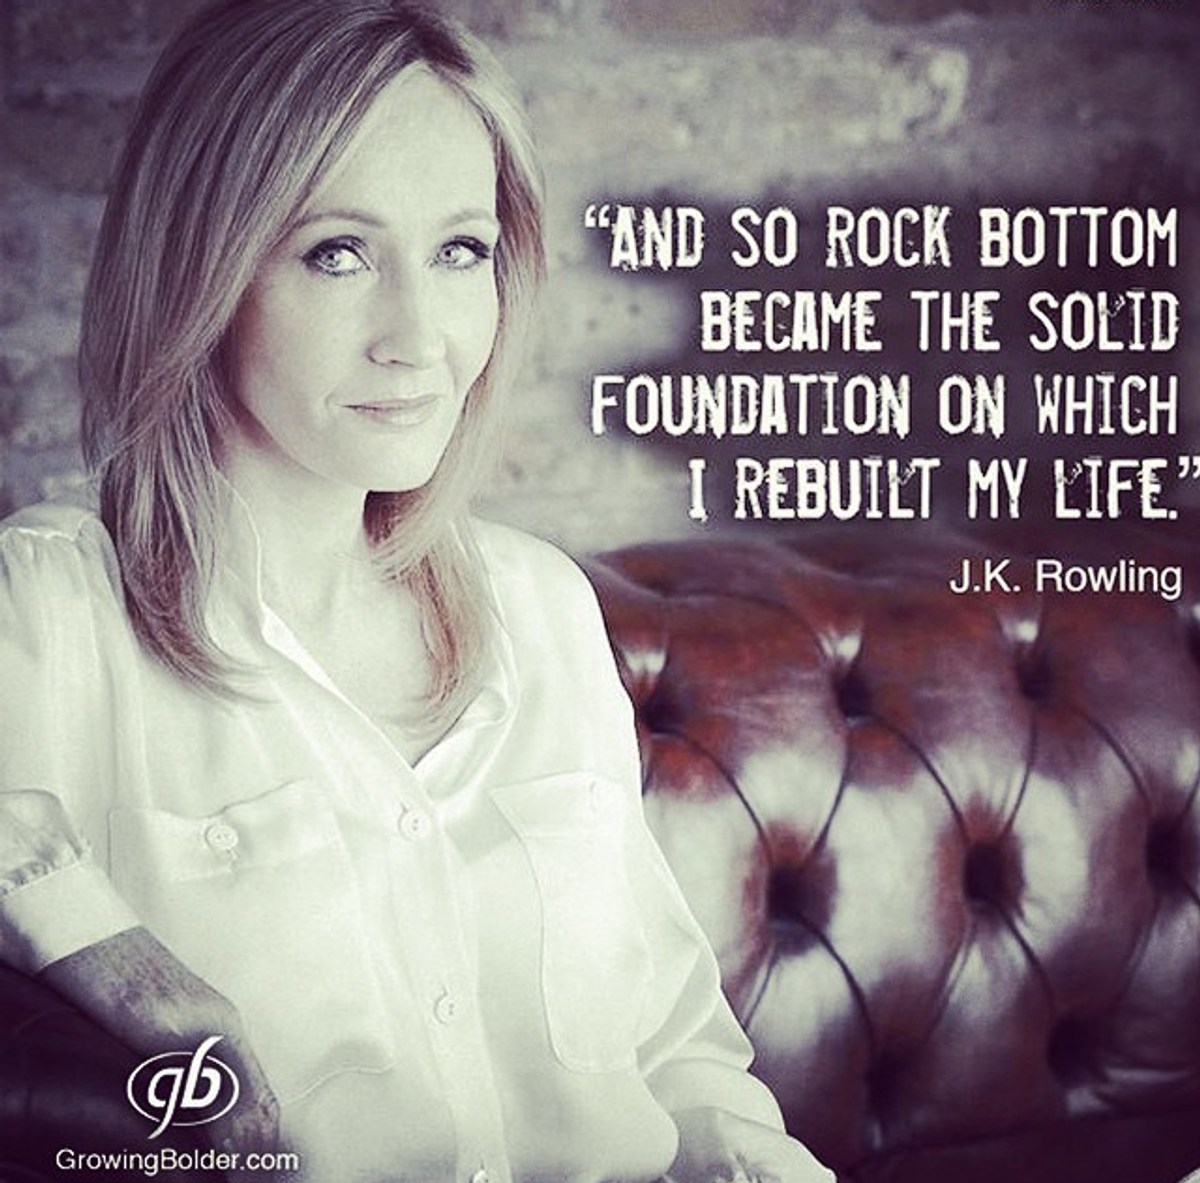 An Open Letter To J.K. Rowling